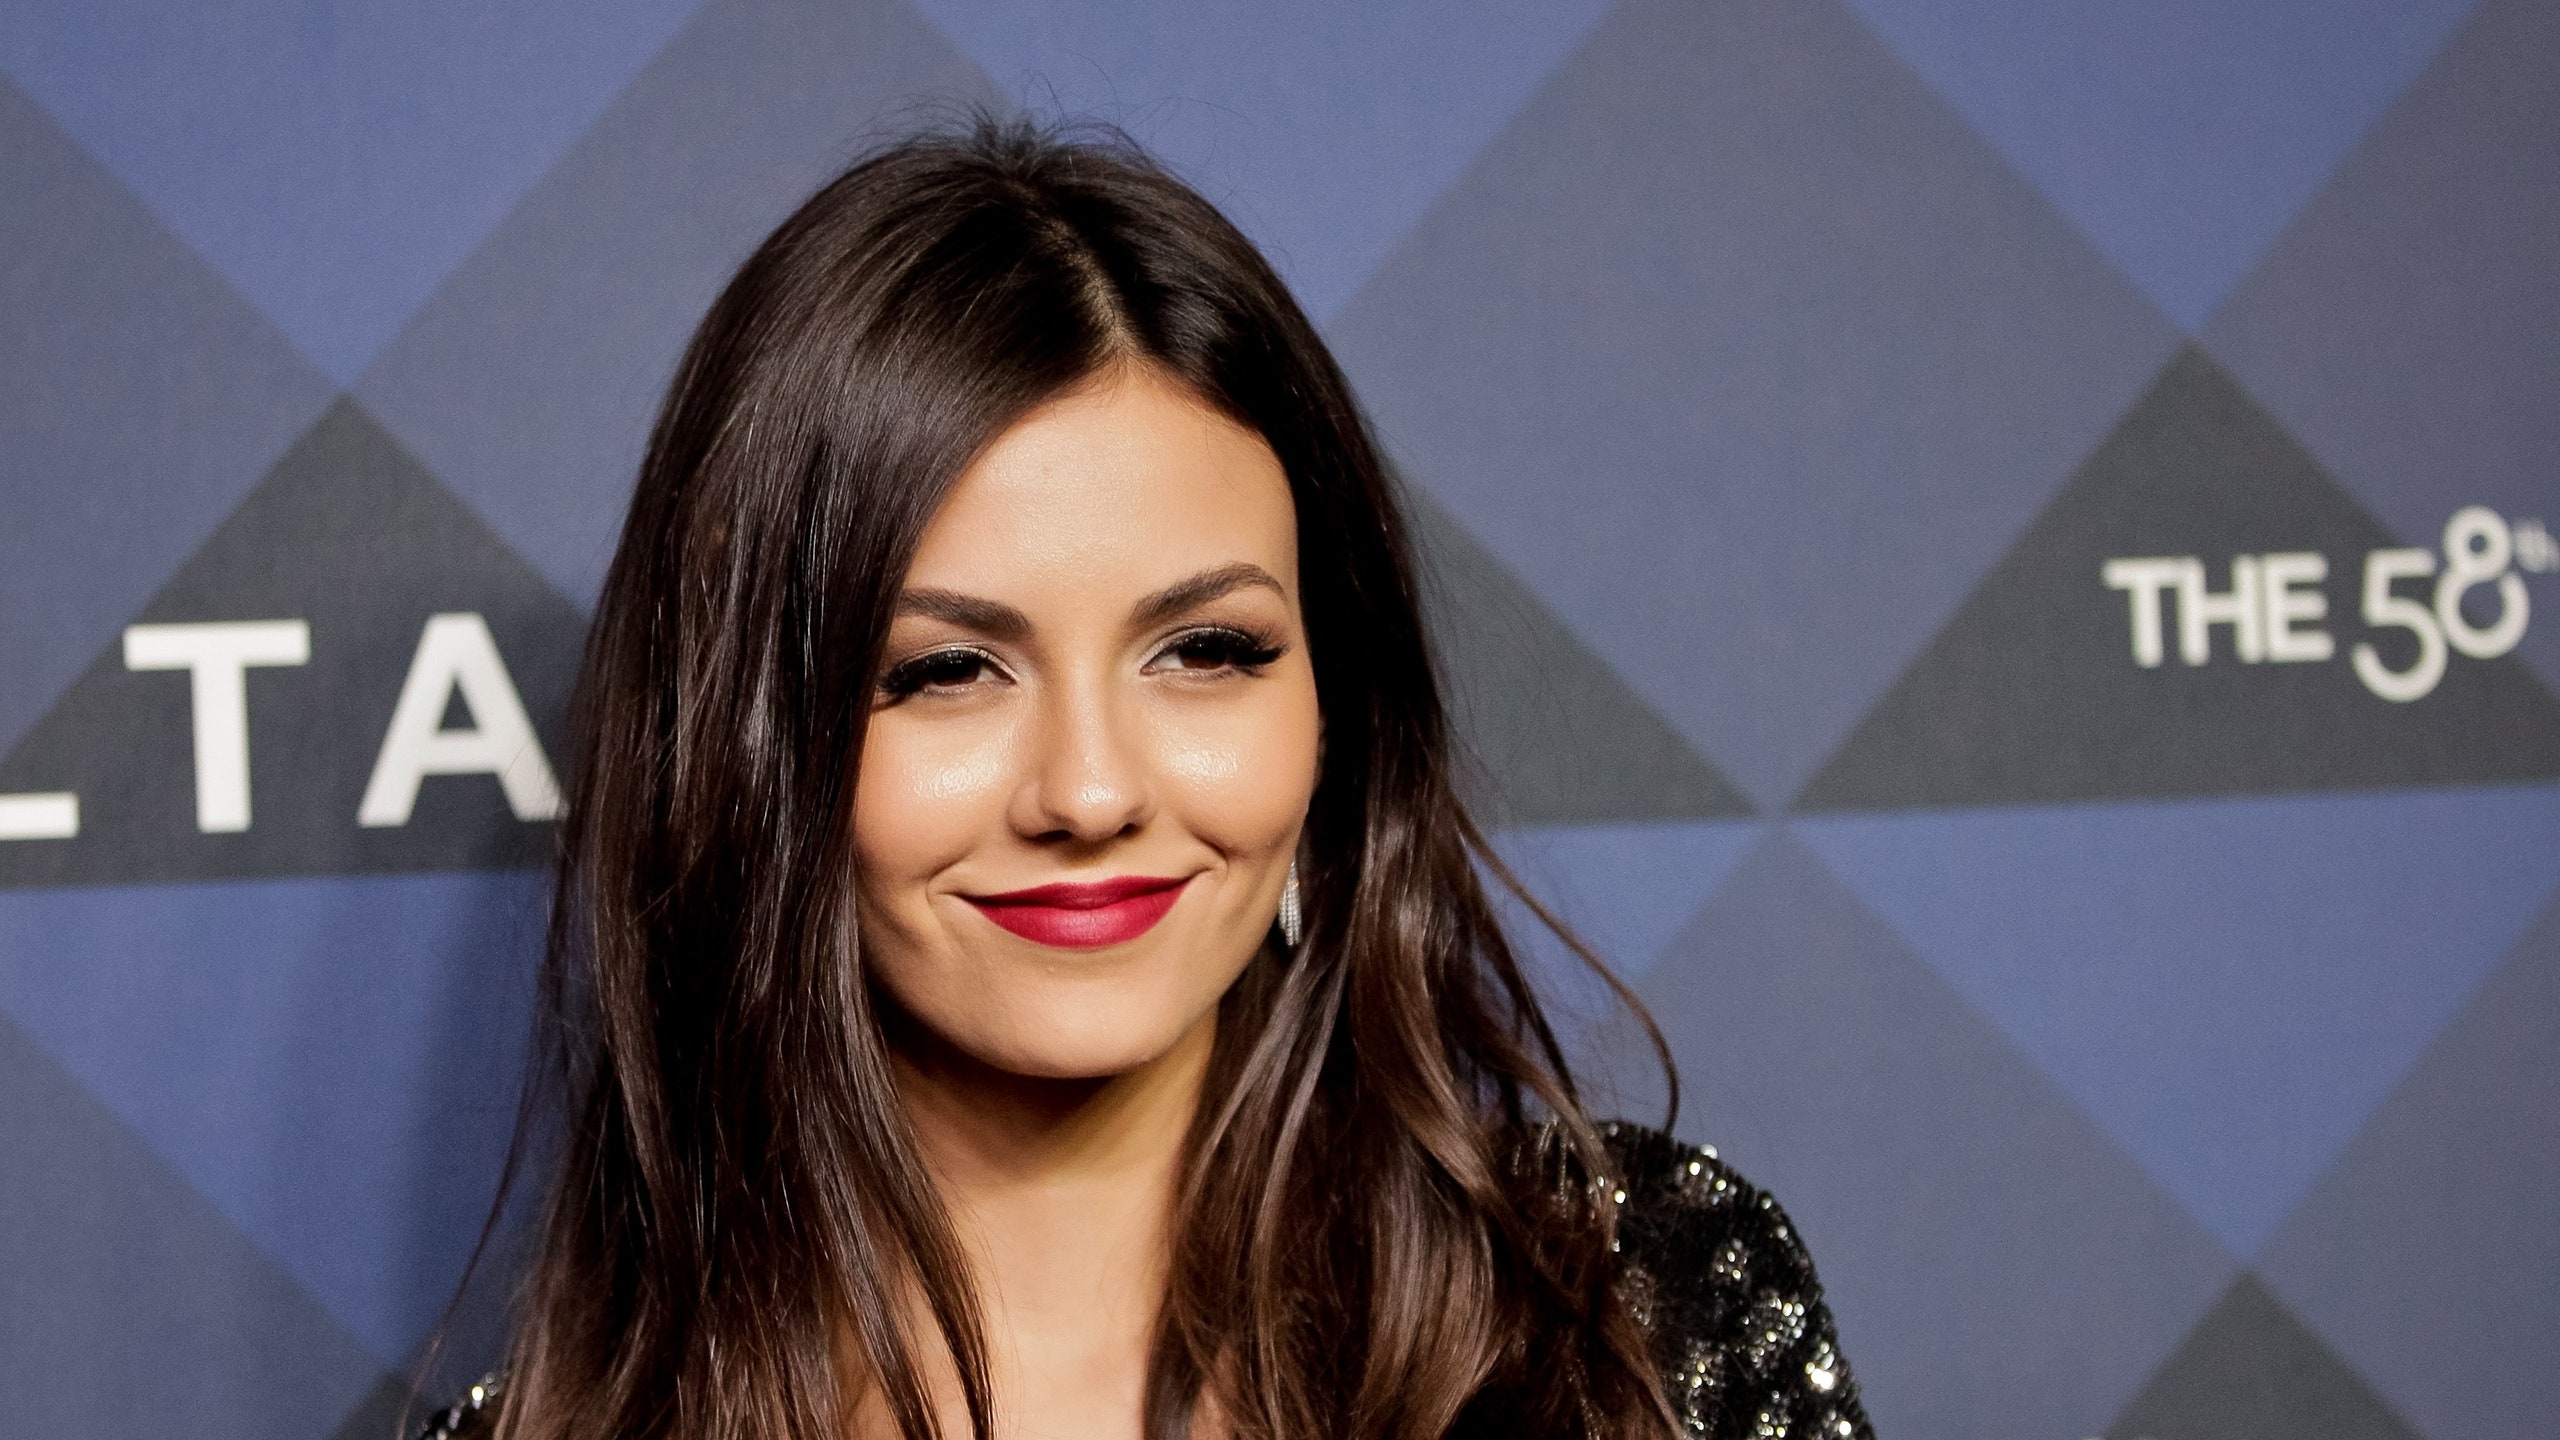 Victoria Justice has got the 2016 Teen Choice Awards